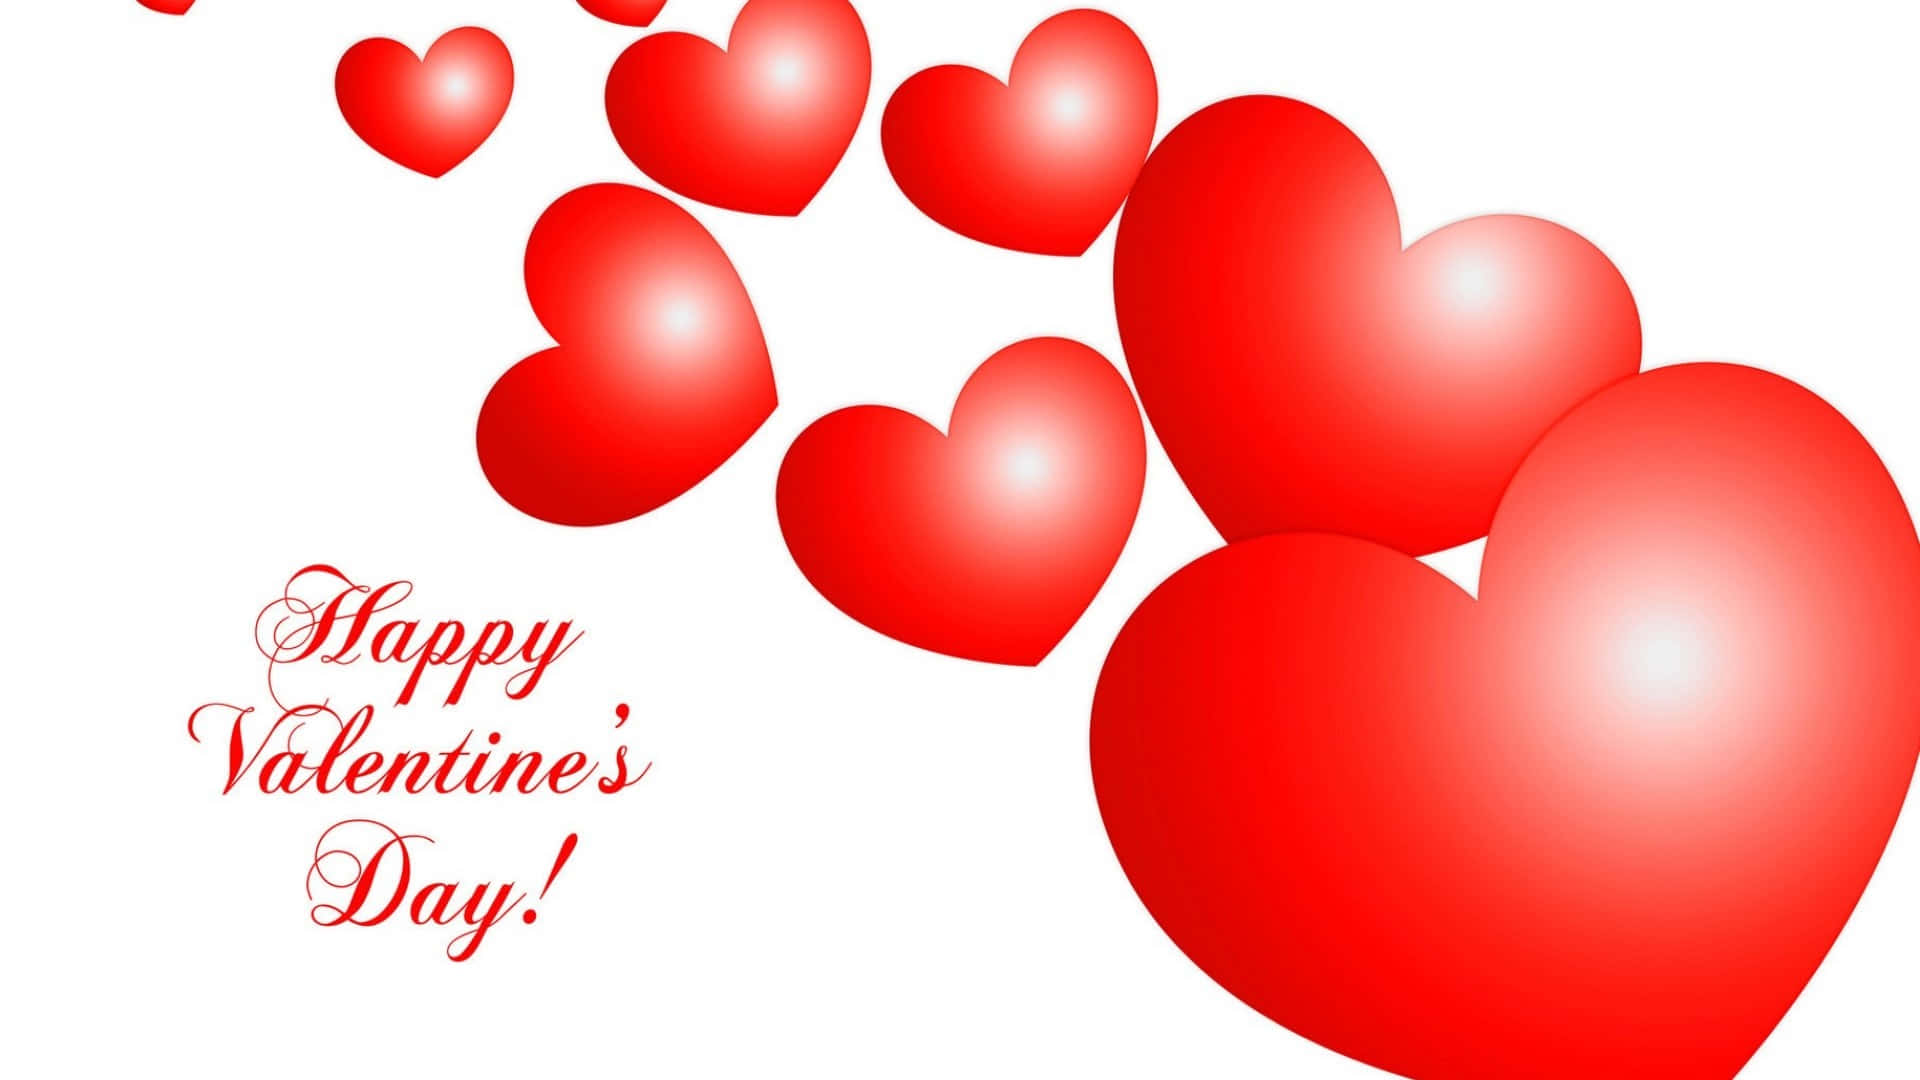 Romantic Happy Valentine's Day background with hearts and roses